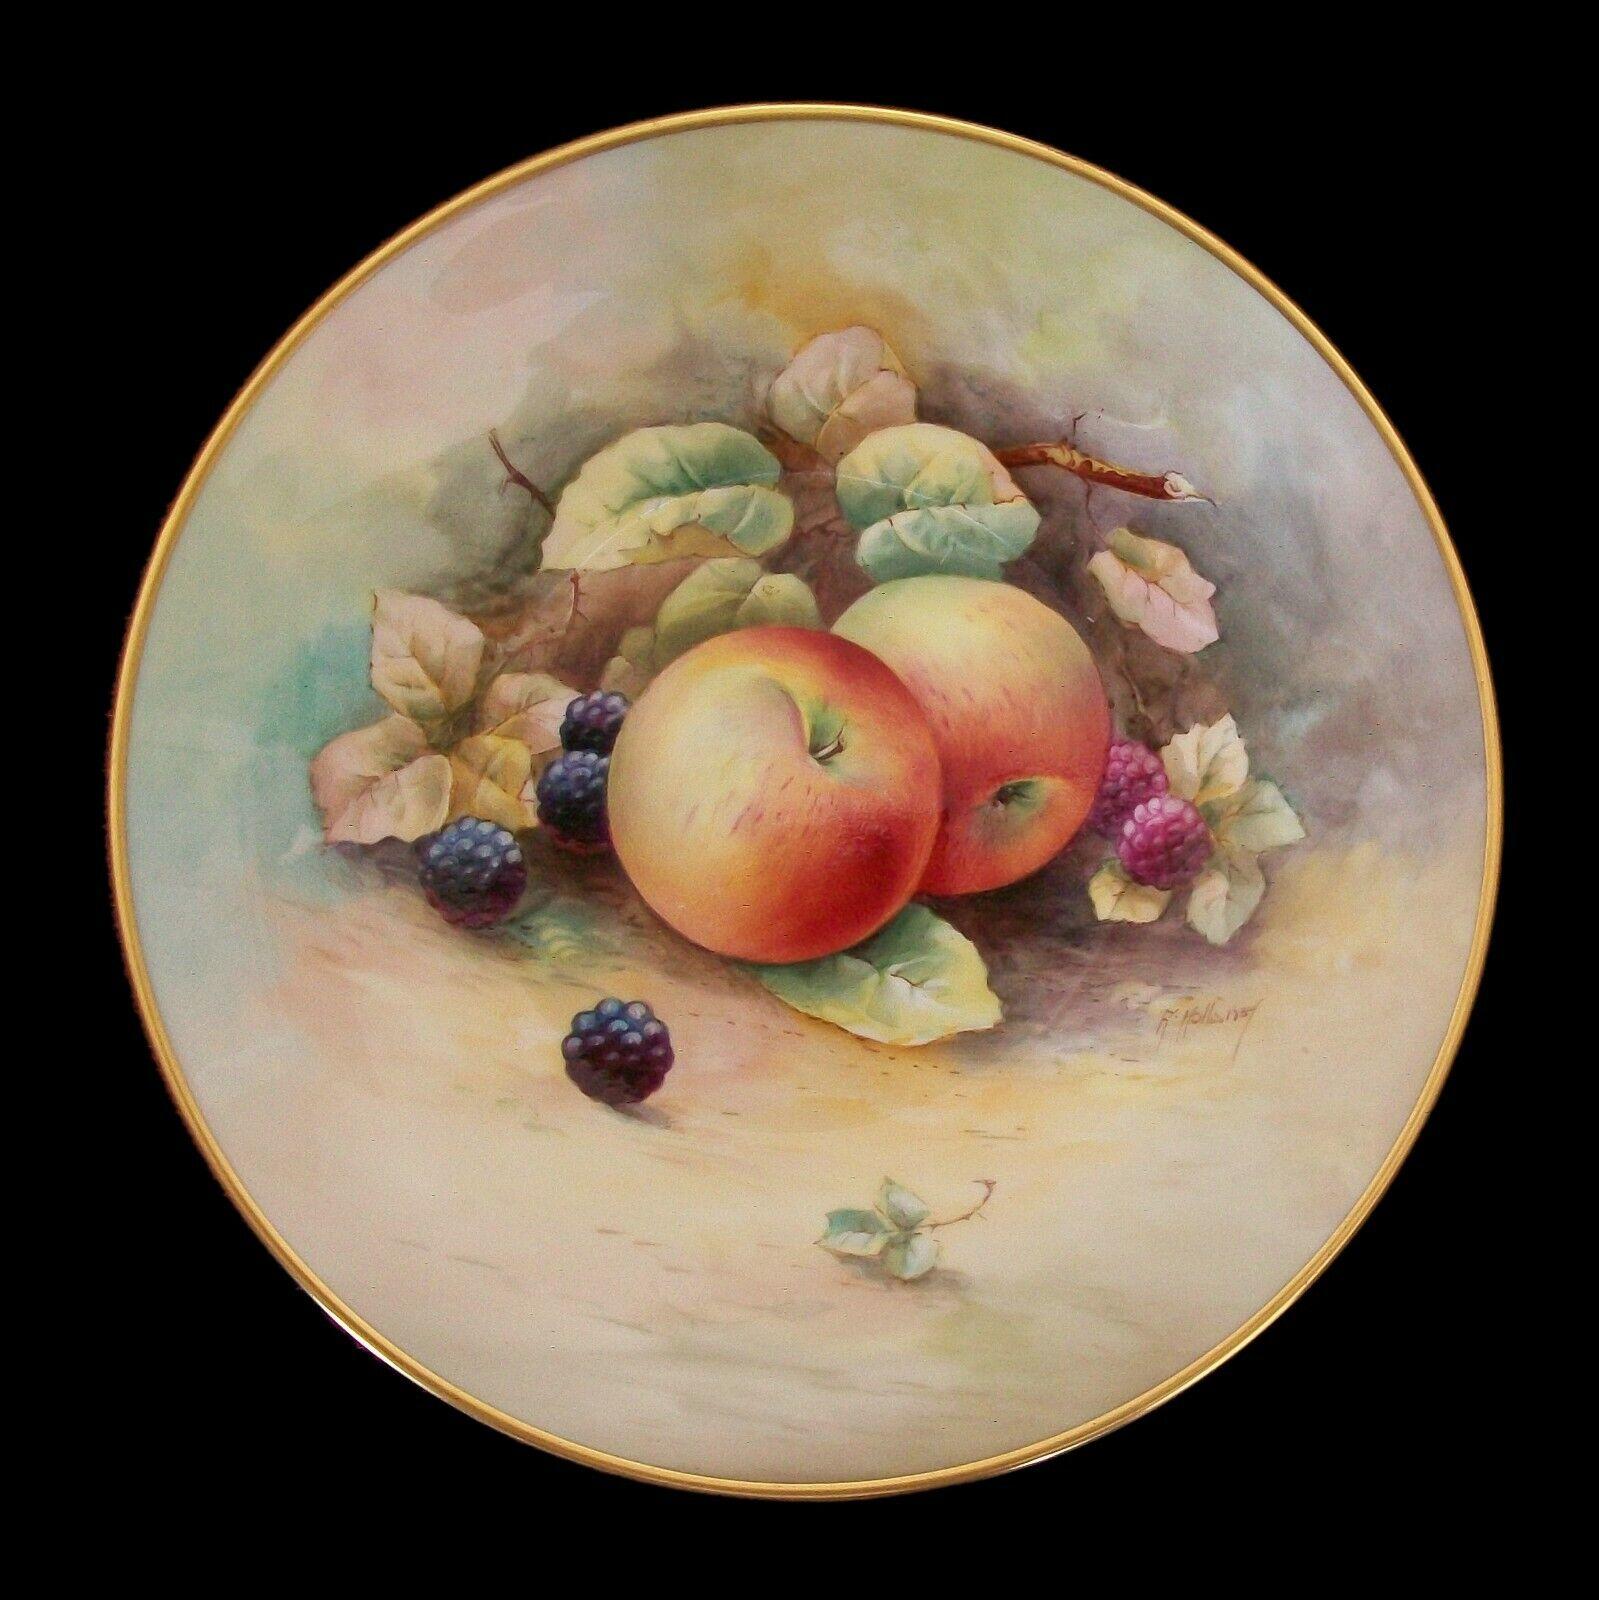 MINTON - Arthur Dale Holland (Artist/Painter, 1896-1979) - Fine and rare vintage bone china cabinet plate - hand painted - featuring a display of fruit including apples, blackberries and raspberries - simple single line gilded border - signed by the